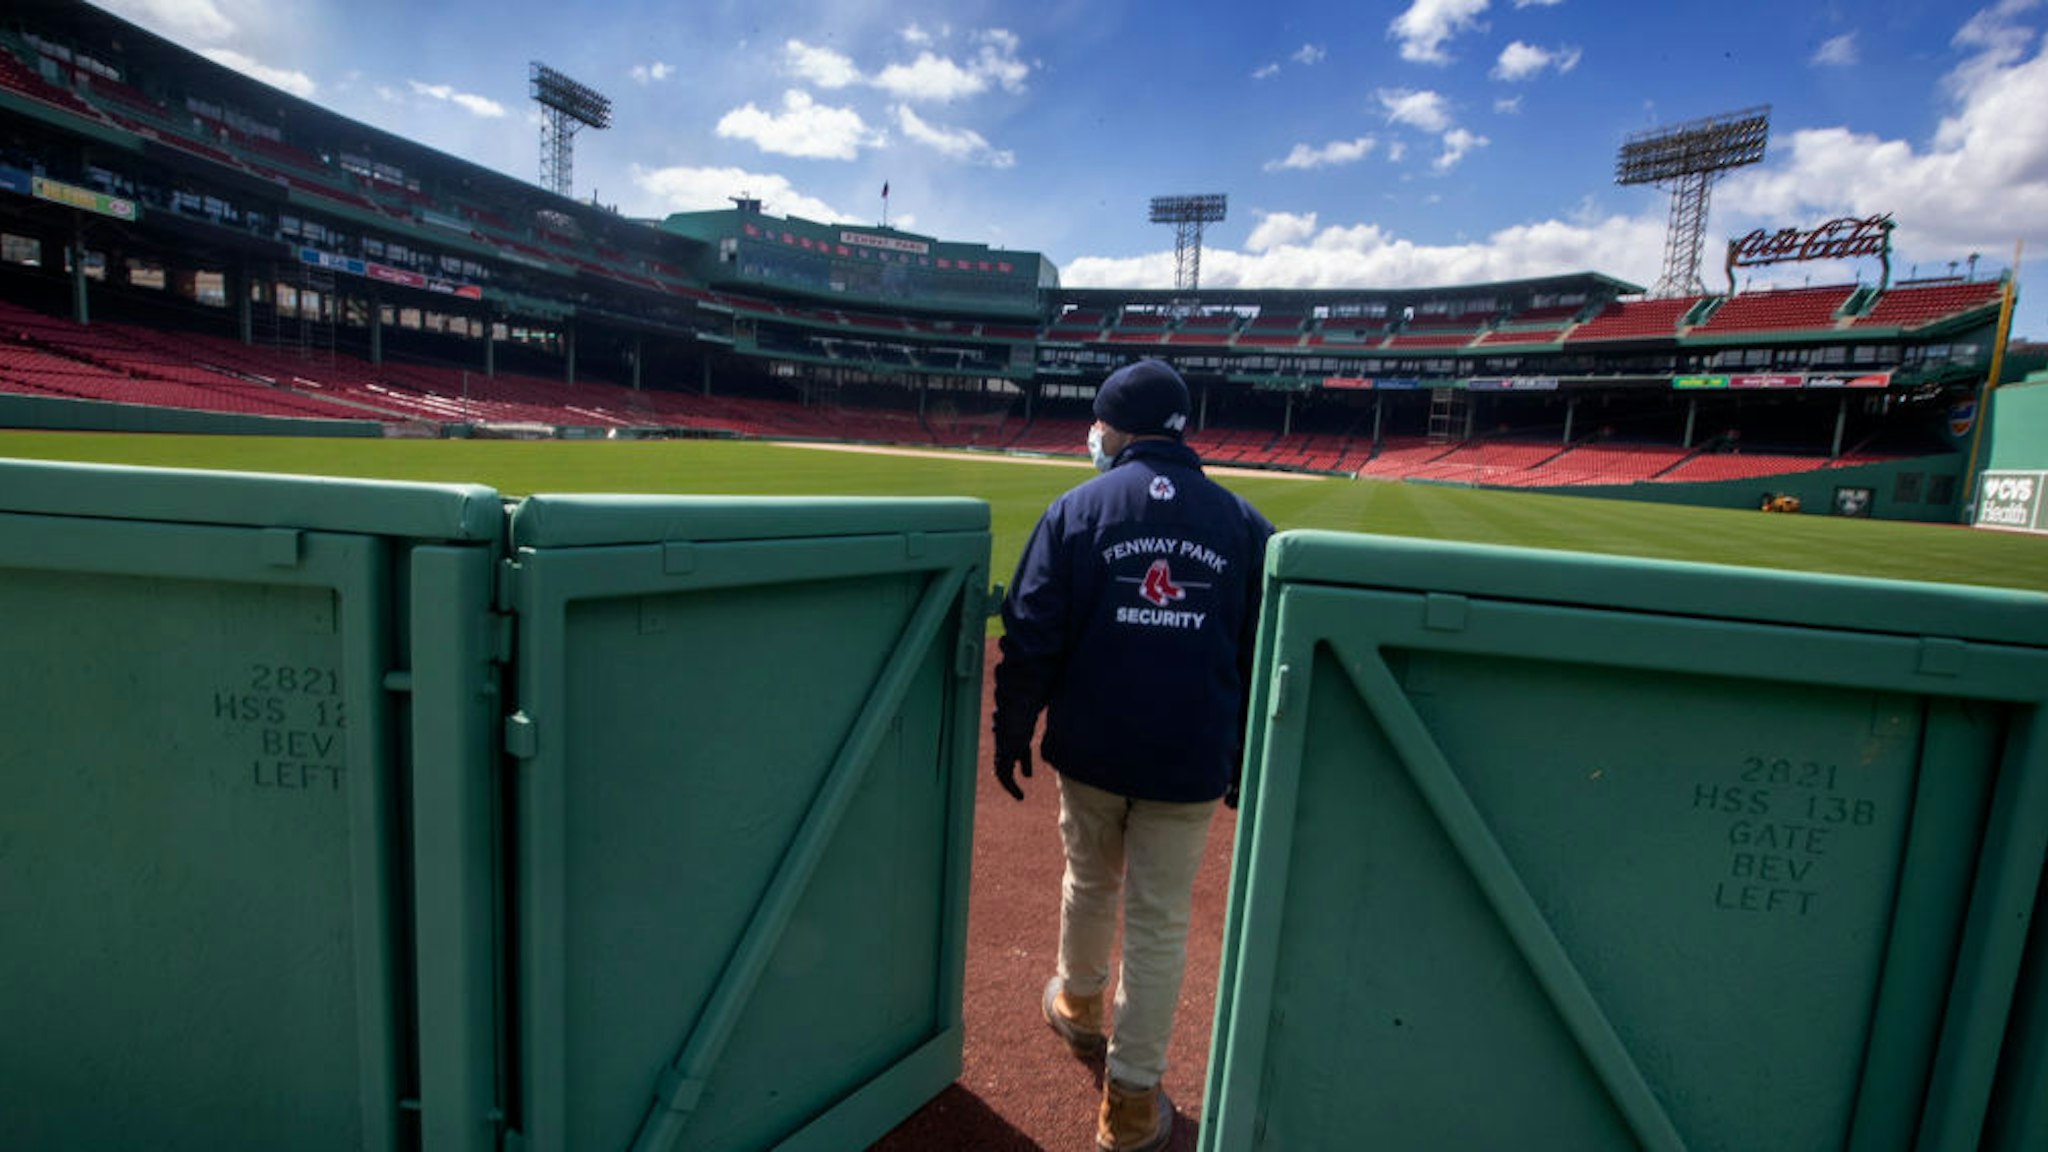 Mike Carpino from Boston Red Sox security leaves the Red Sox bullpen at Fenway Park on April 16, 2020. Fenway Park in Boston remains closed during the coronavirus emergency. (Photo by Stan Grossfeld/The Boston Globe via Getty Images)